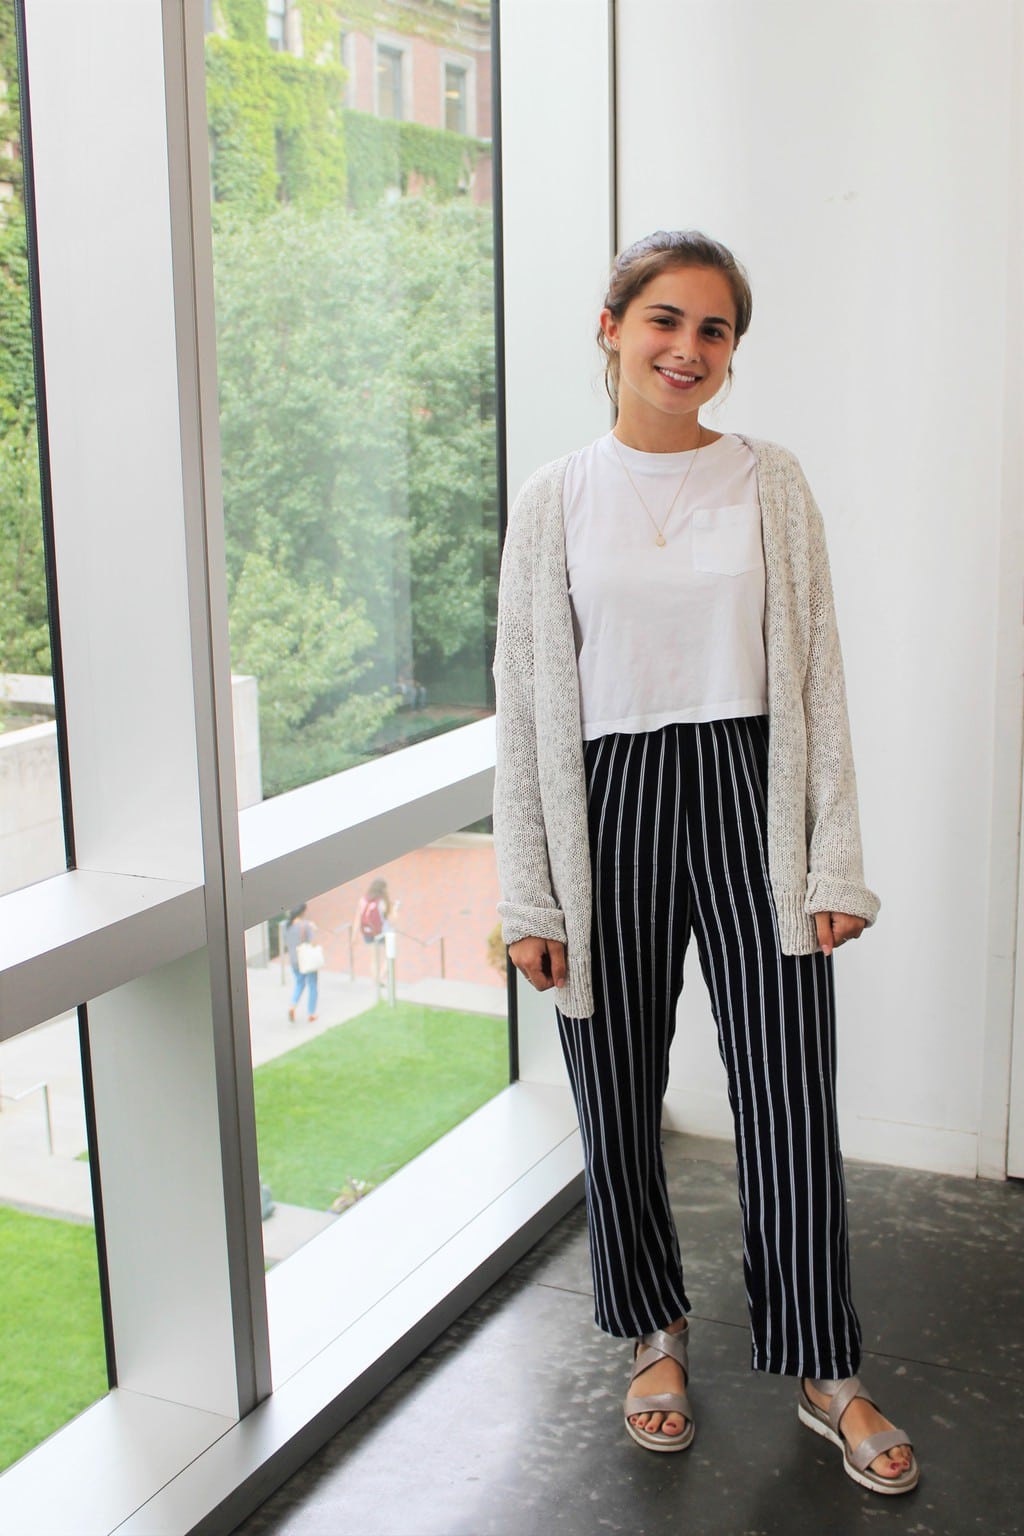 Maya, a student at Barnard College at Columbia University, sports a neutral white crop top, cozy off-white oversized cardigan, vertically striped black and white pants, and silver sandals.